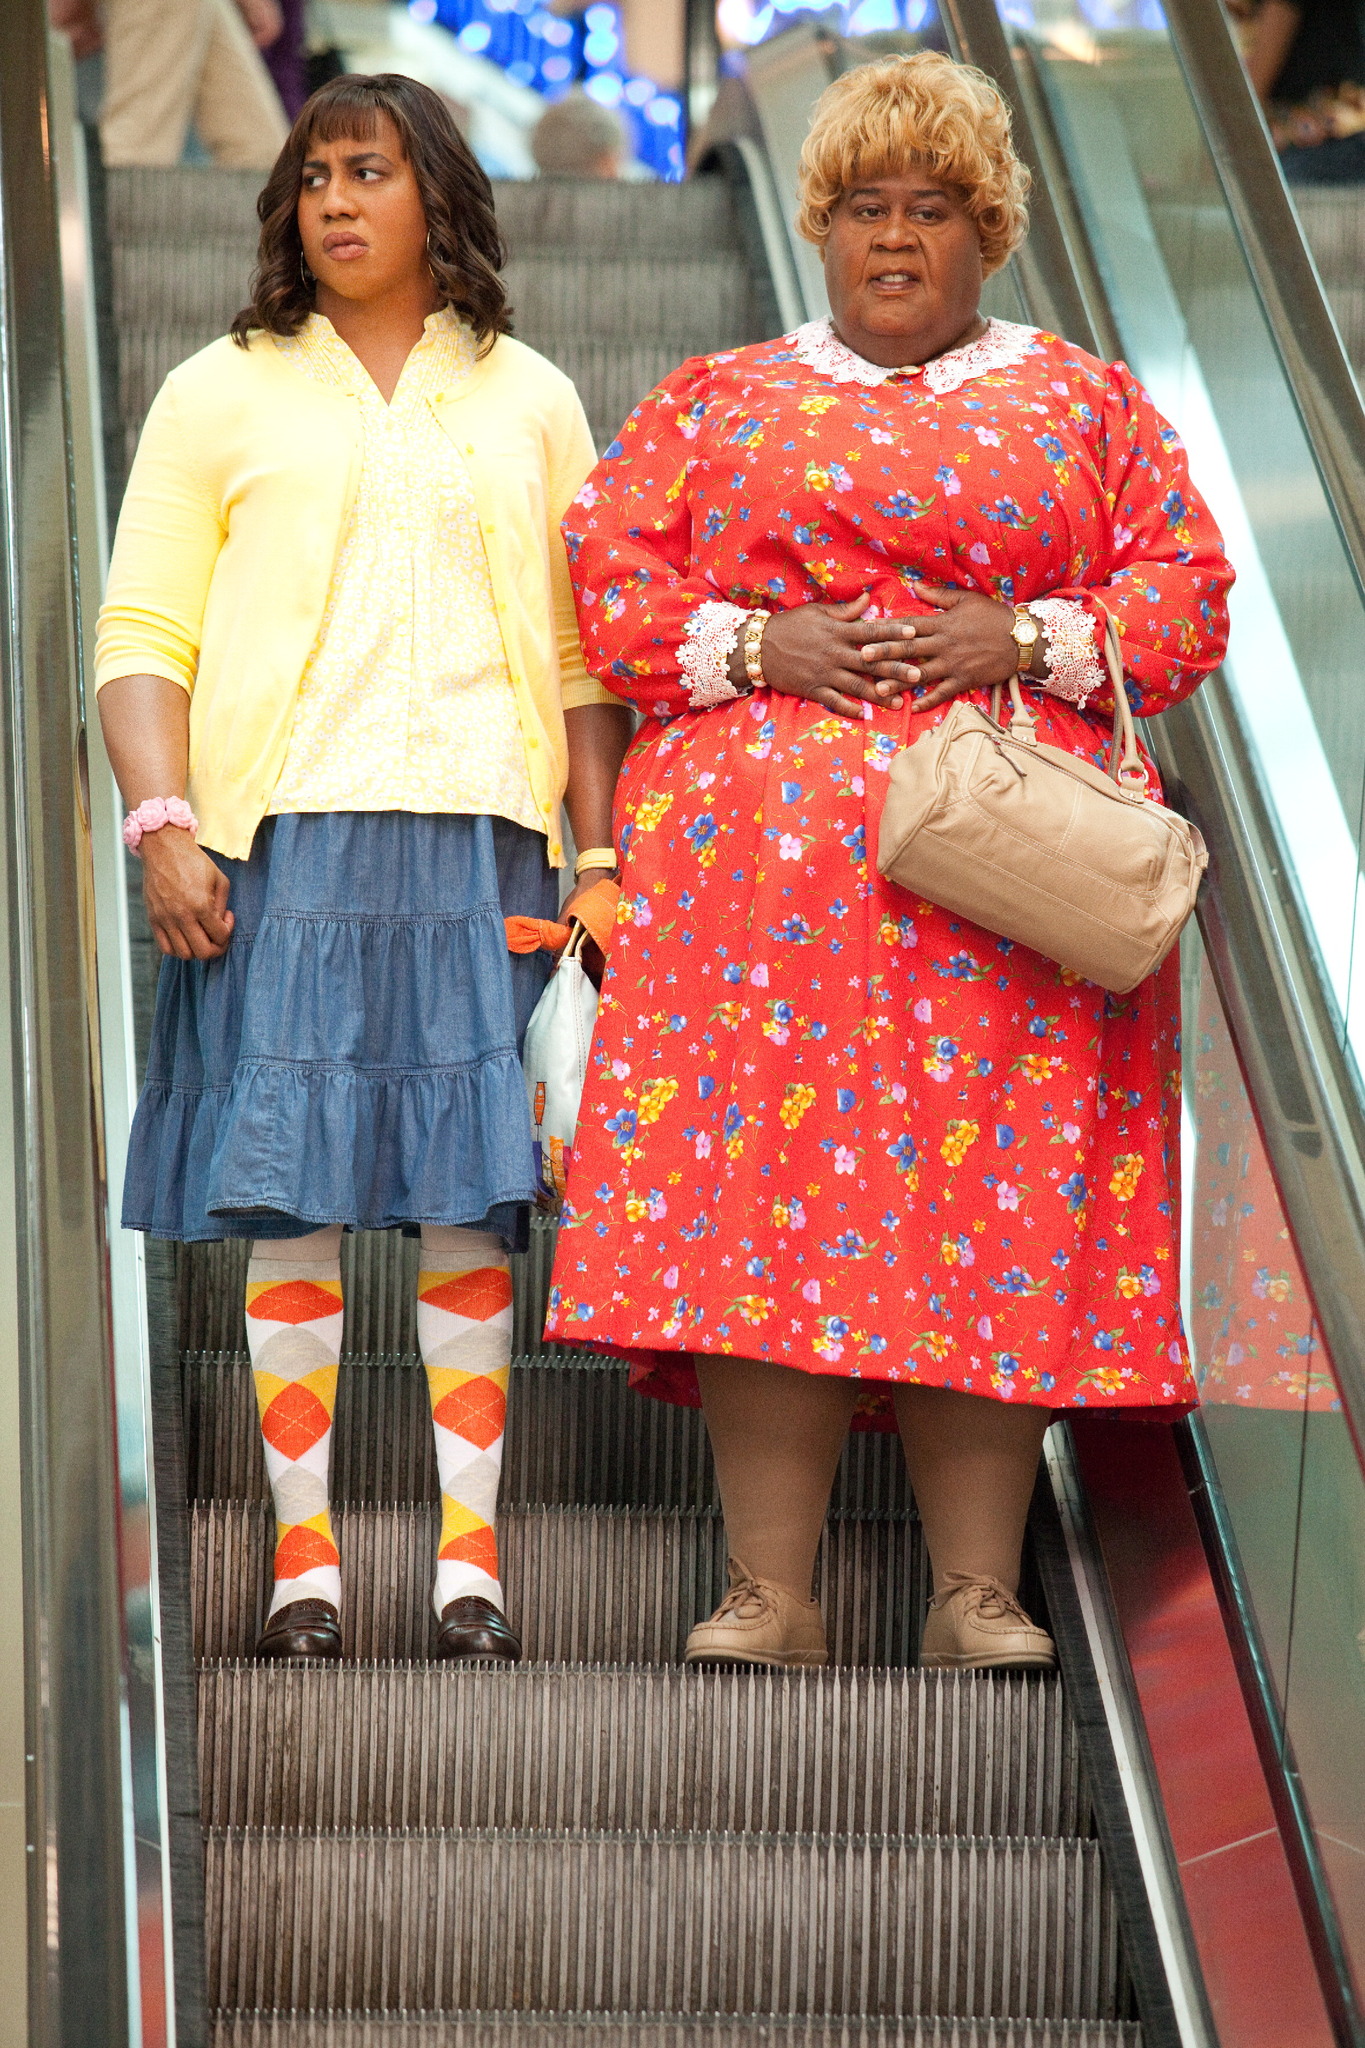 Still of Martin Lawrence and Brandon T. Jackson in Big Mommas: Like Father, Like Son (2011)